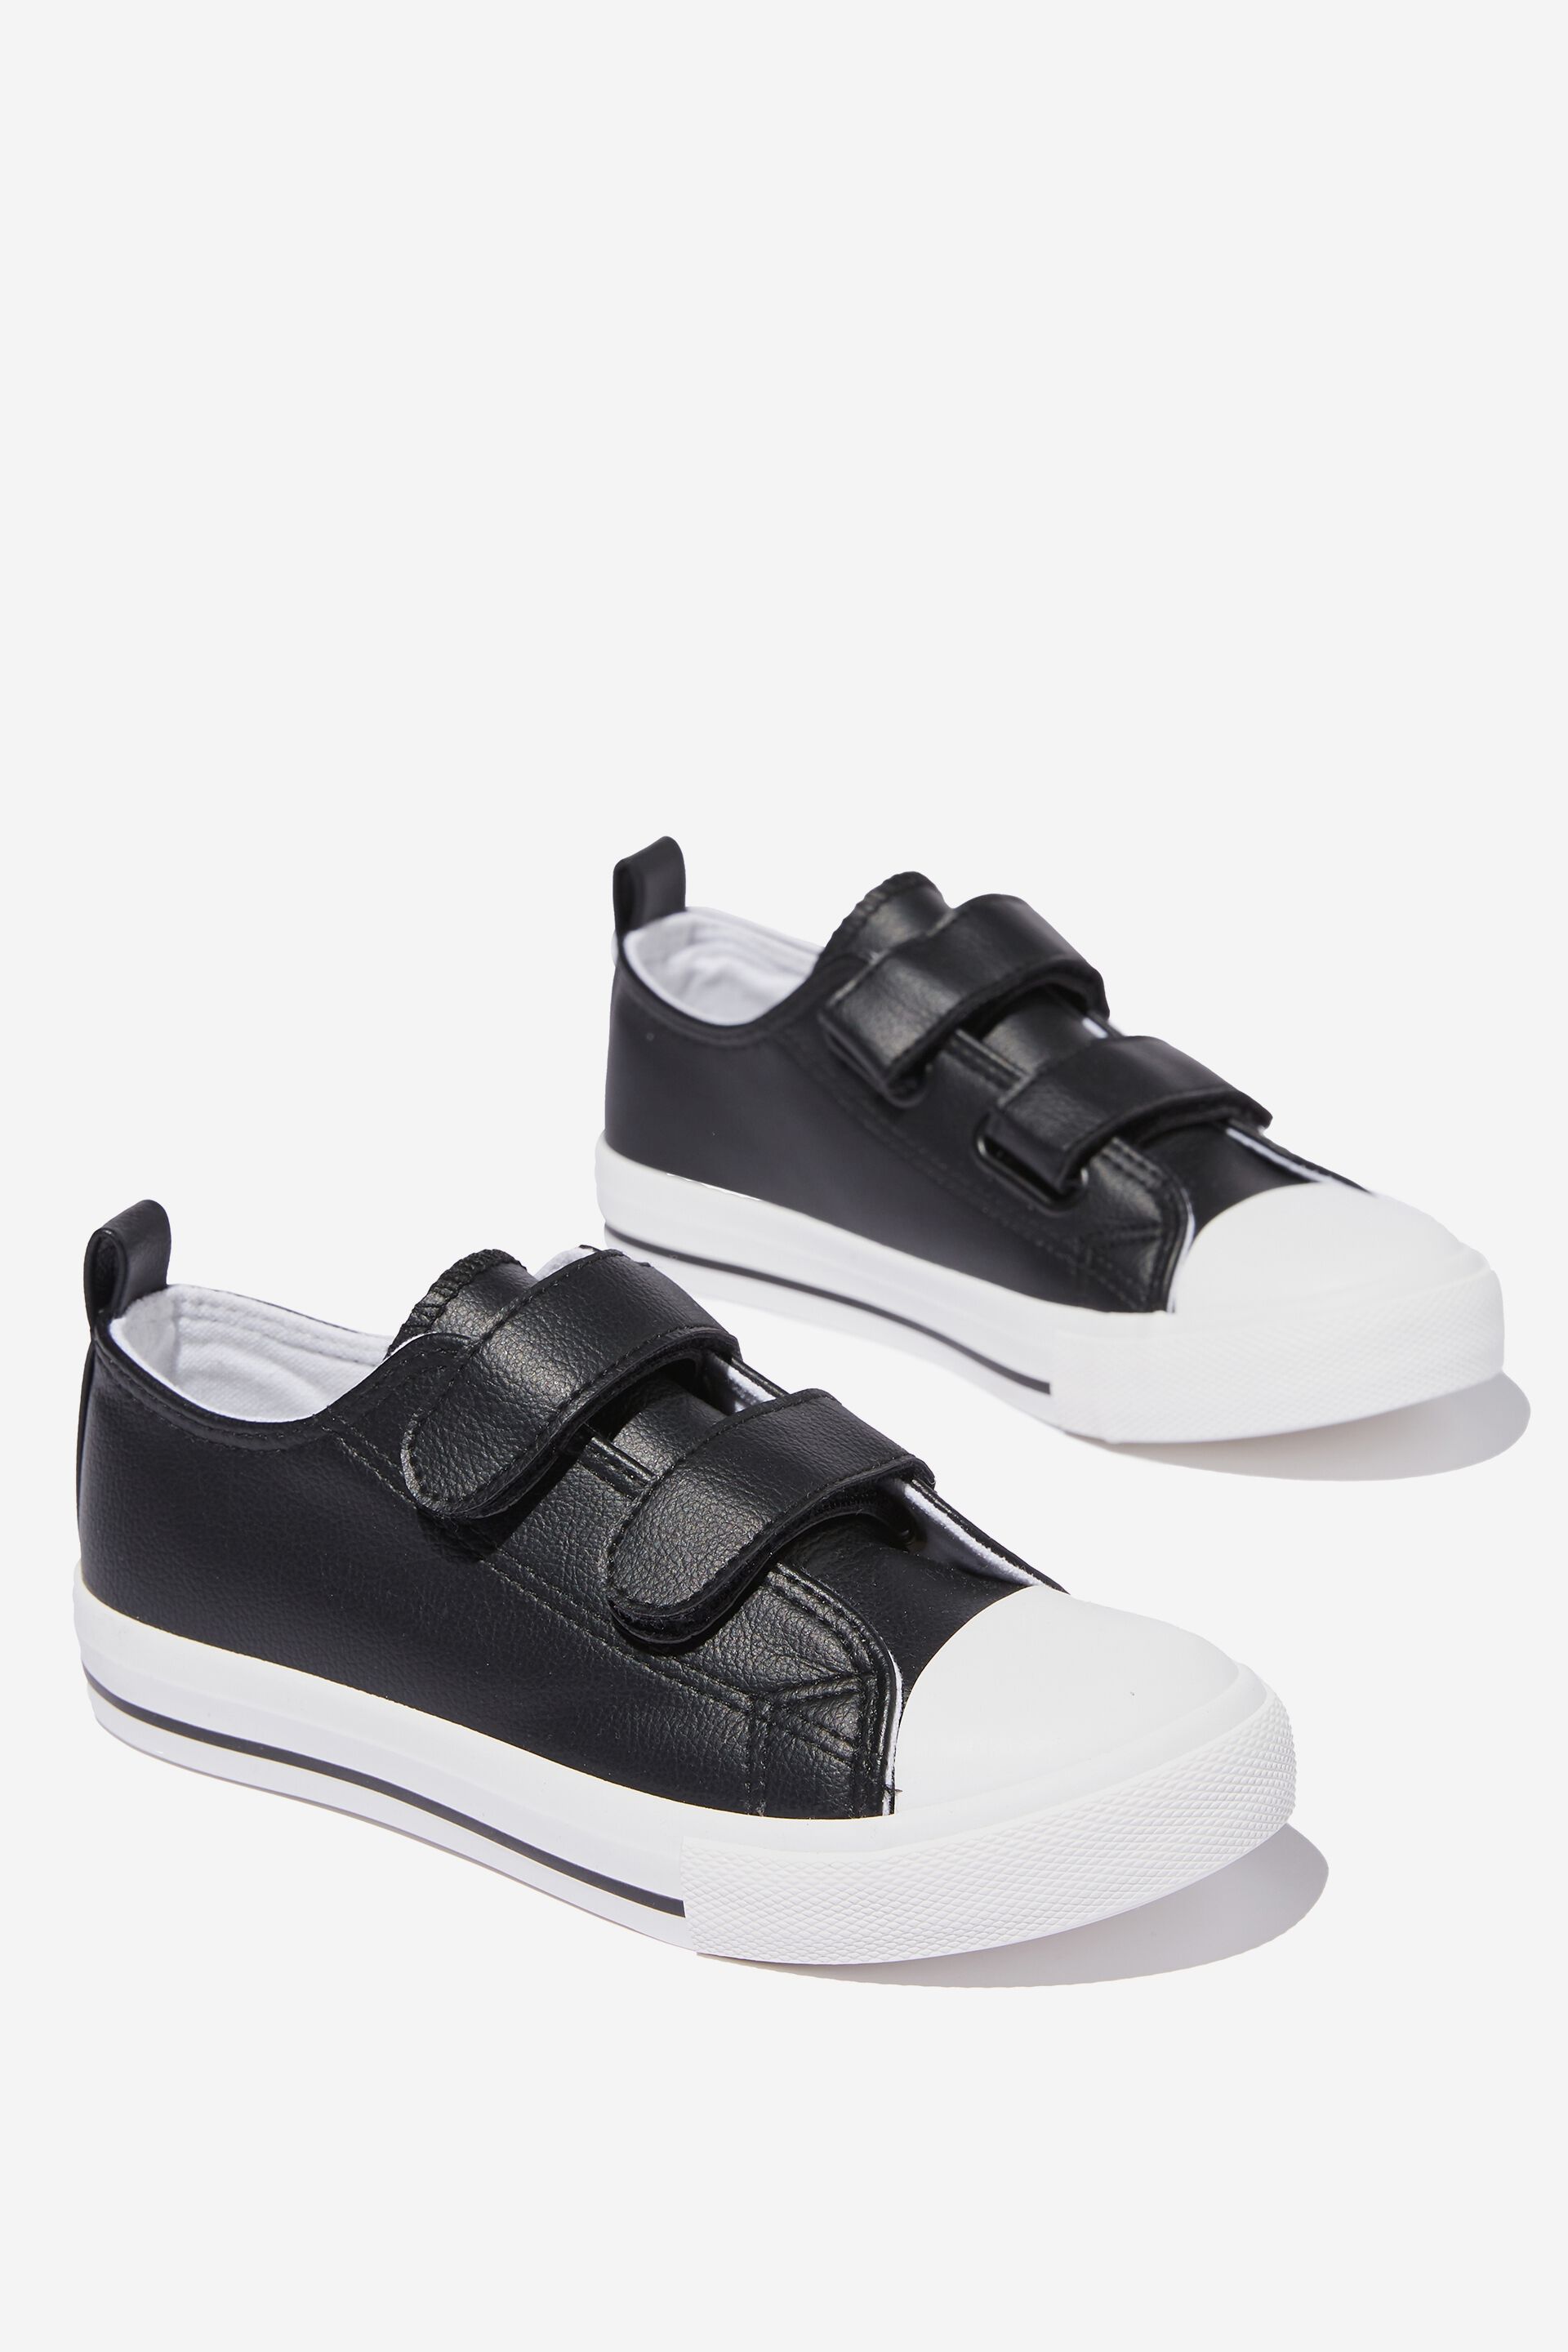 Shoes & Accessories Sneakers | Classic Double Strap Trainer - RQ39793